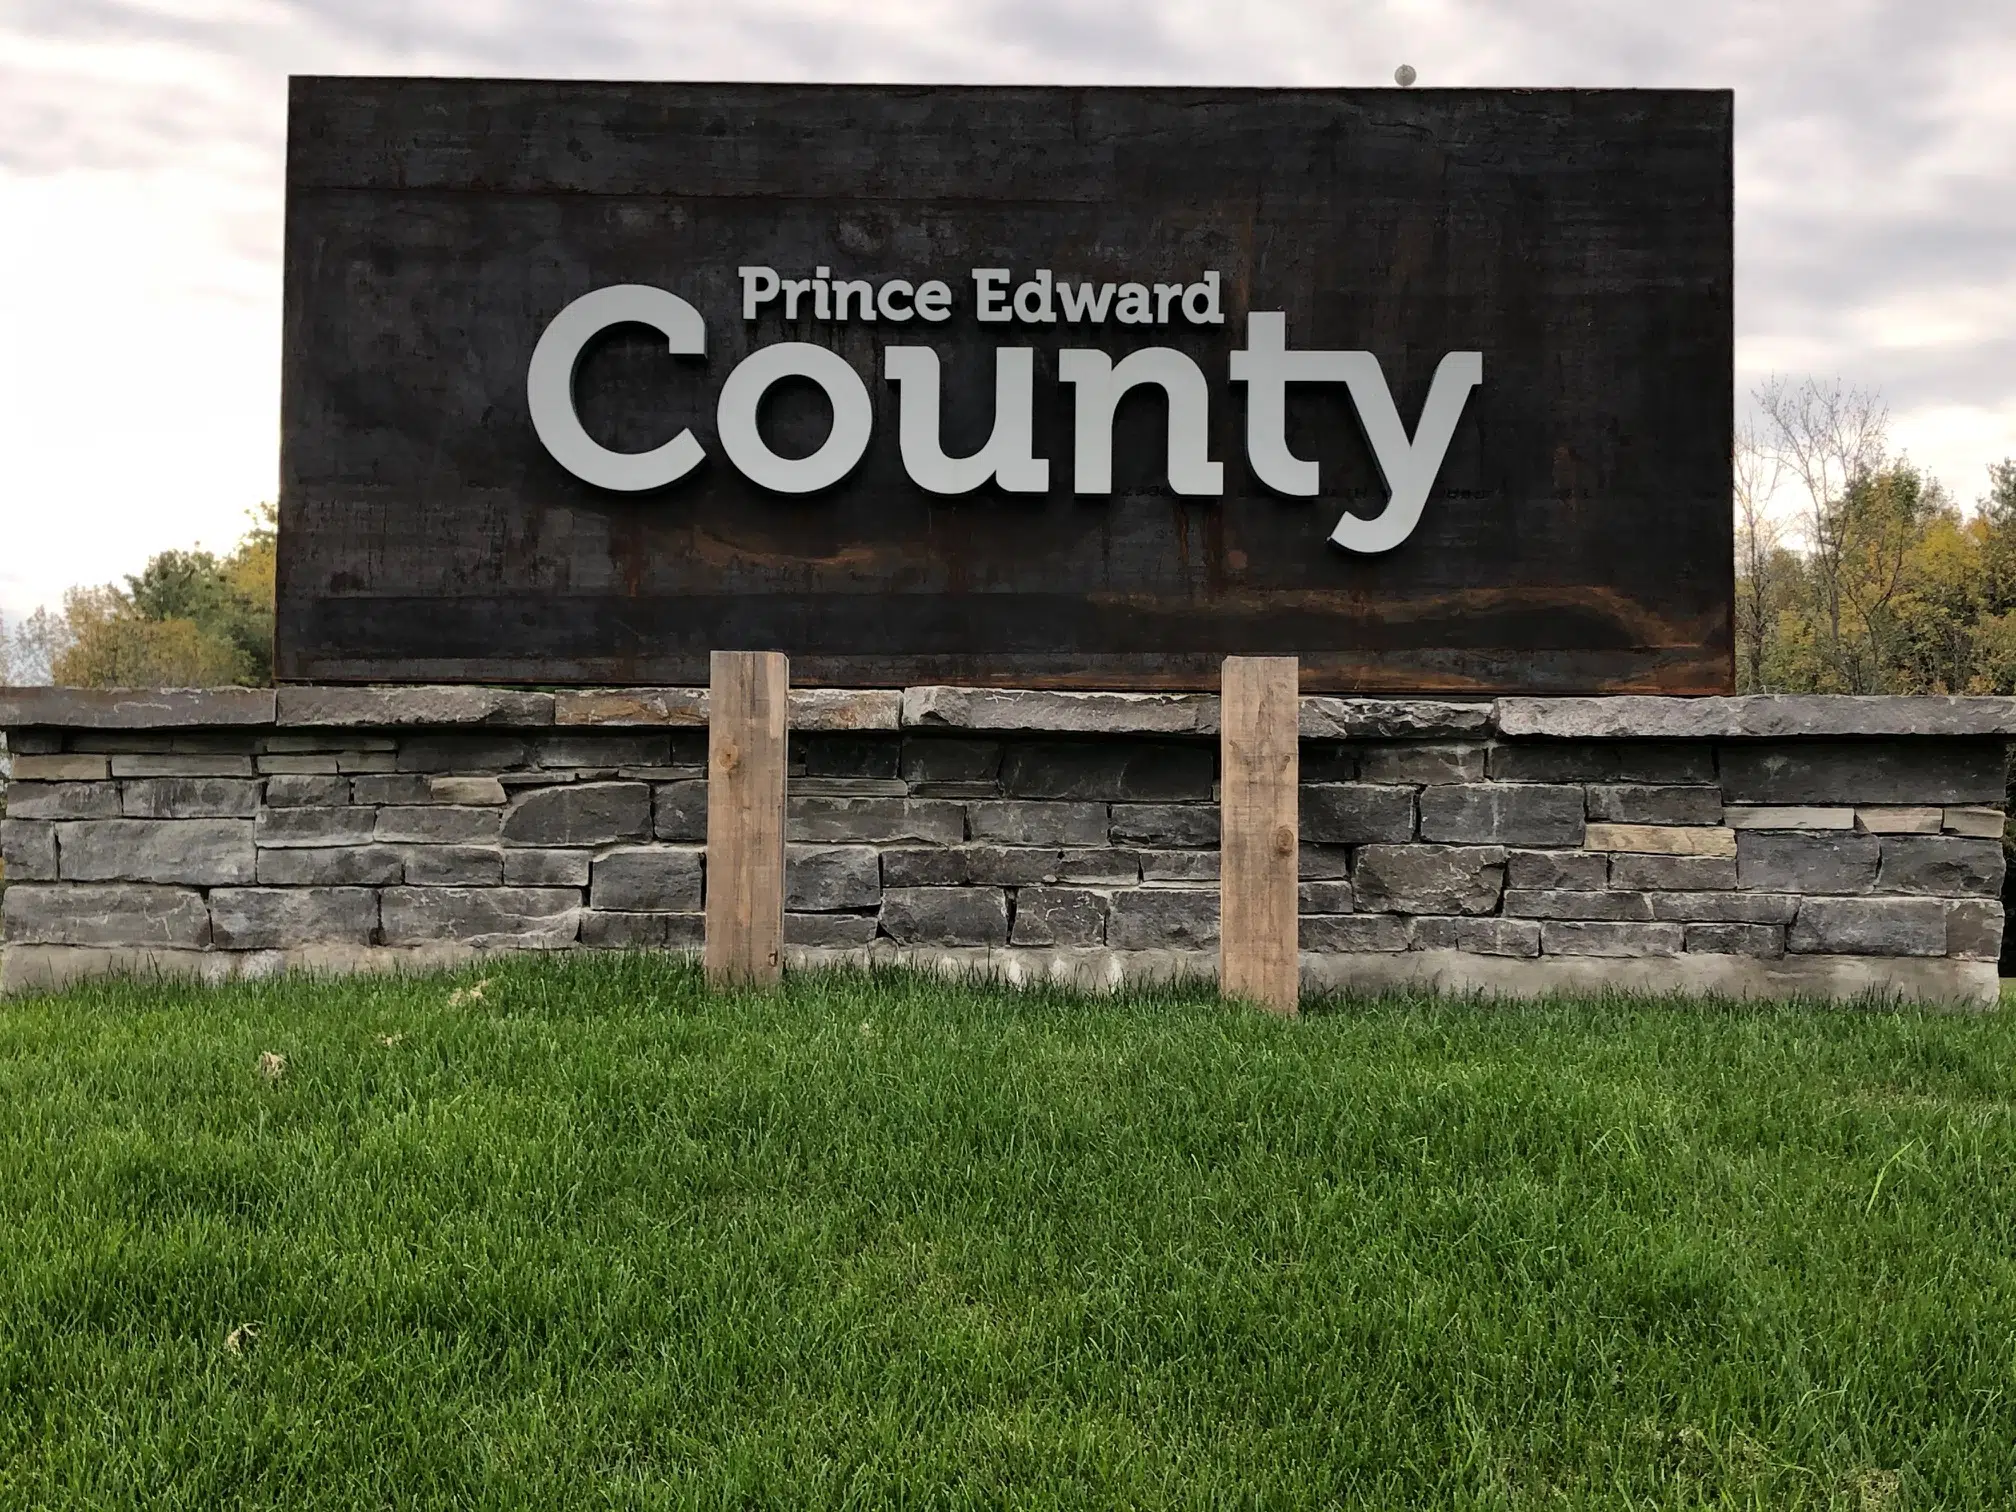 Prince Edward County council meeting recessed until Thursday